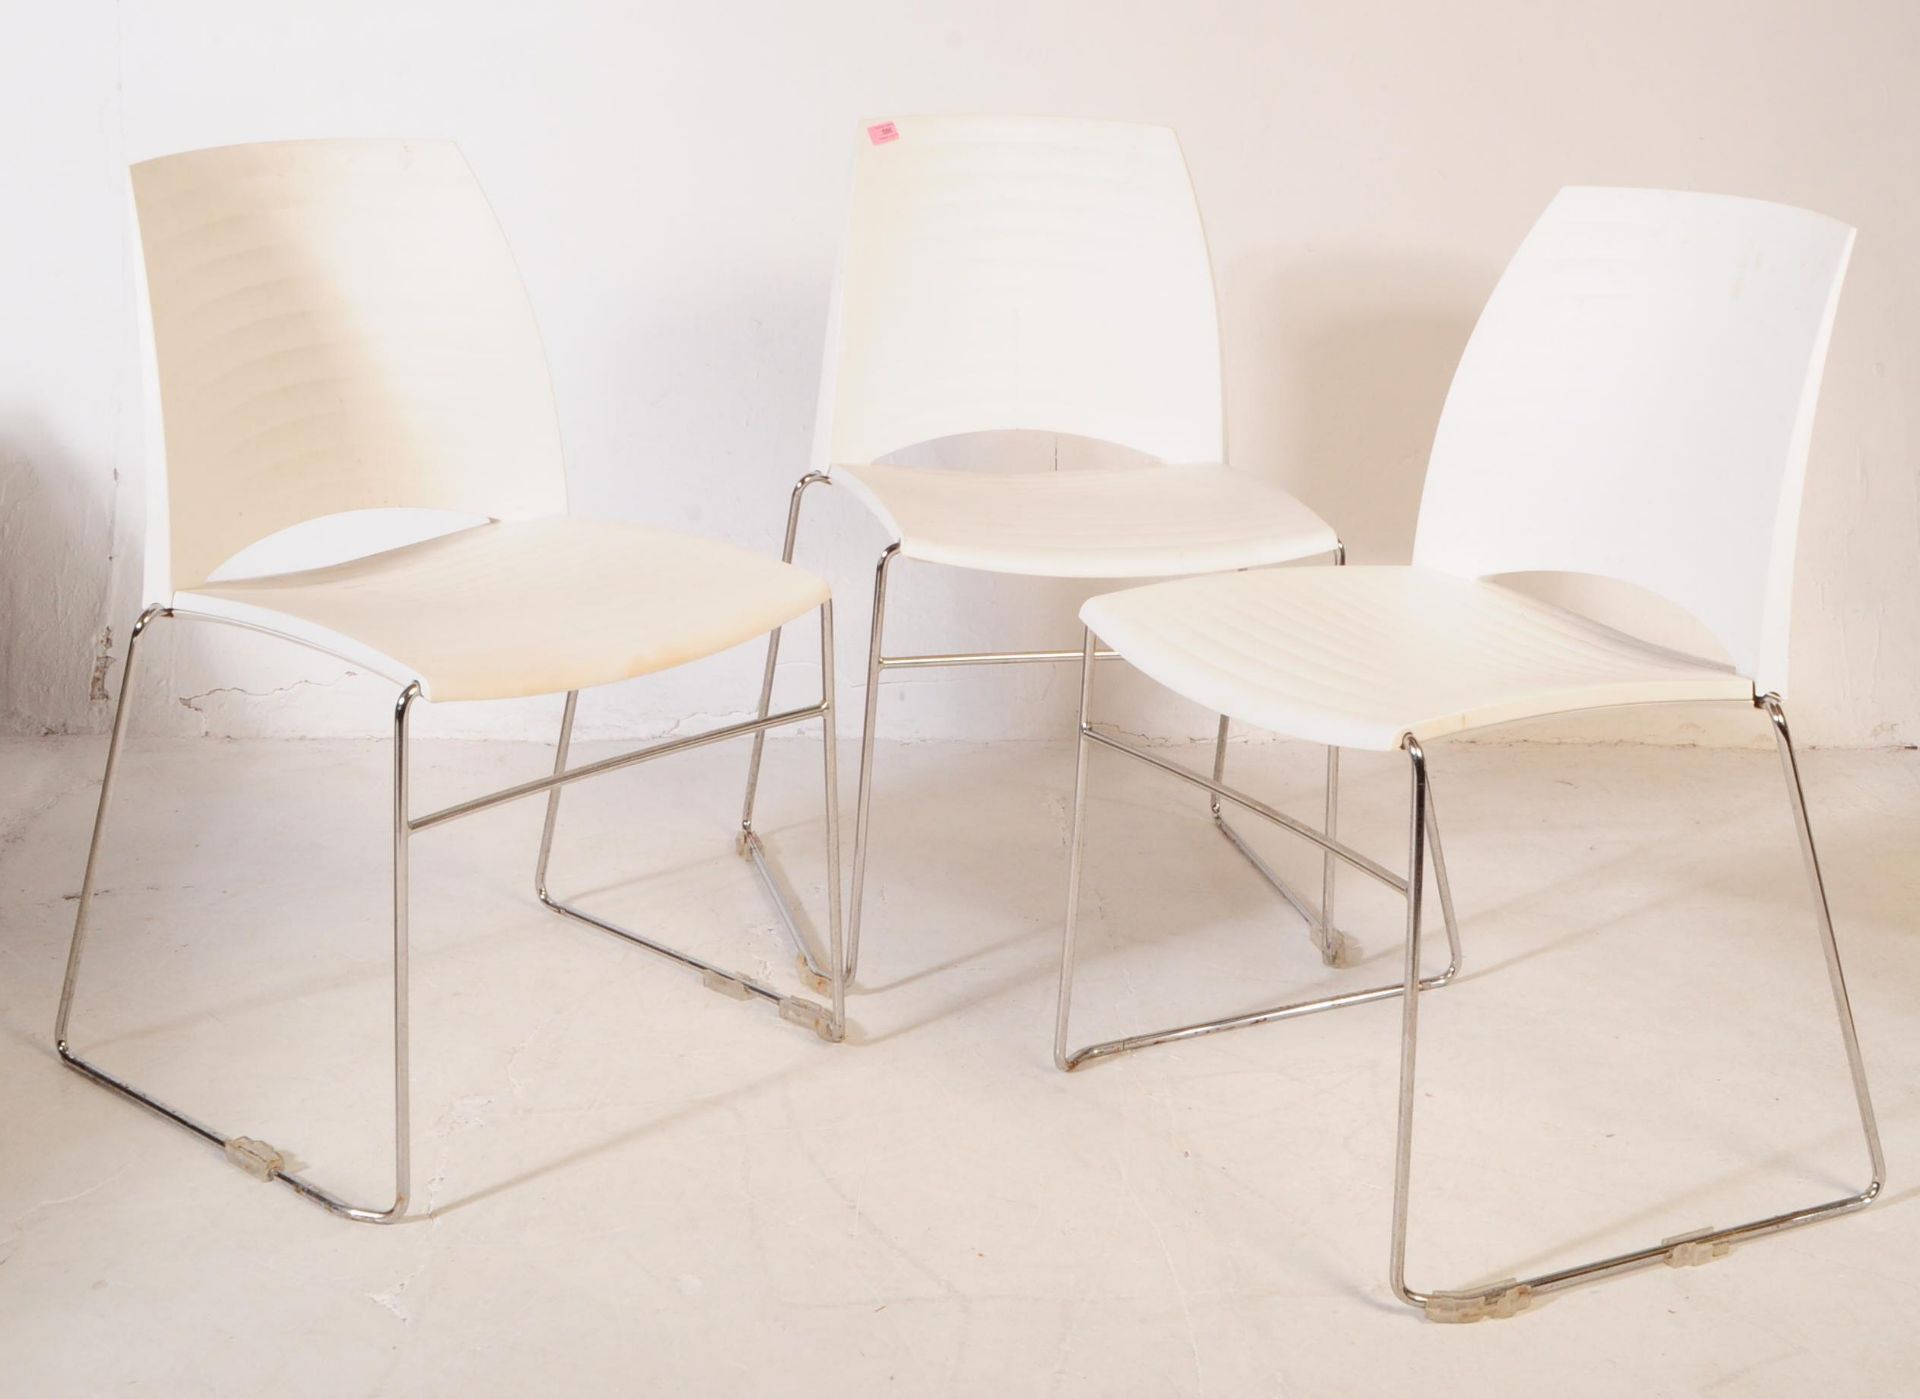 FROVI - MID 20TH CENTURY CANTEEN CHAIRS